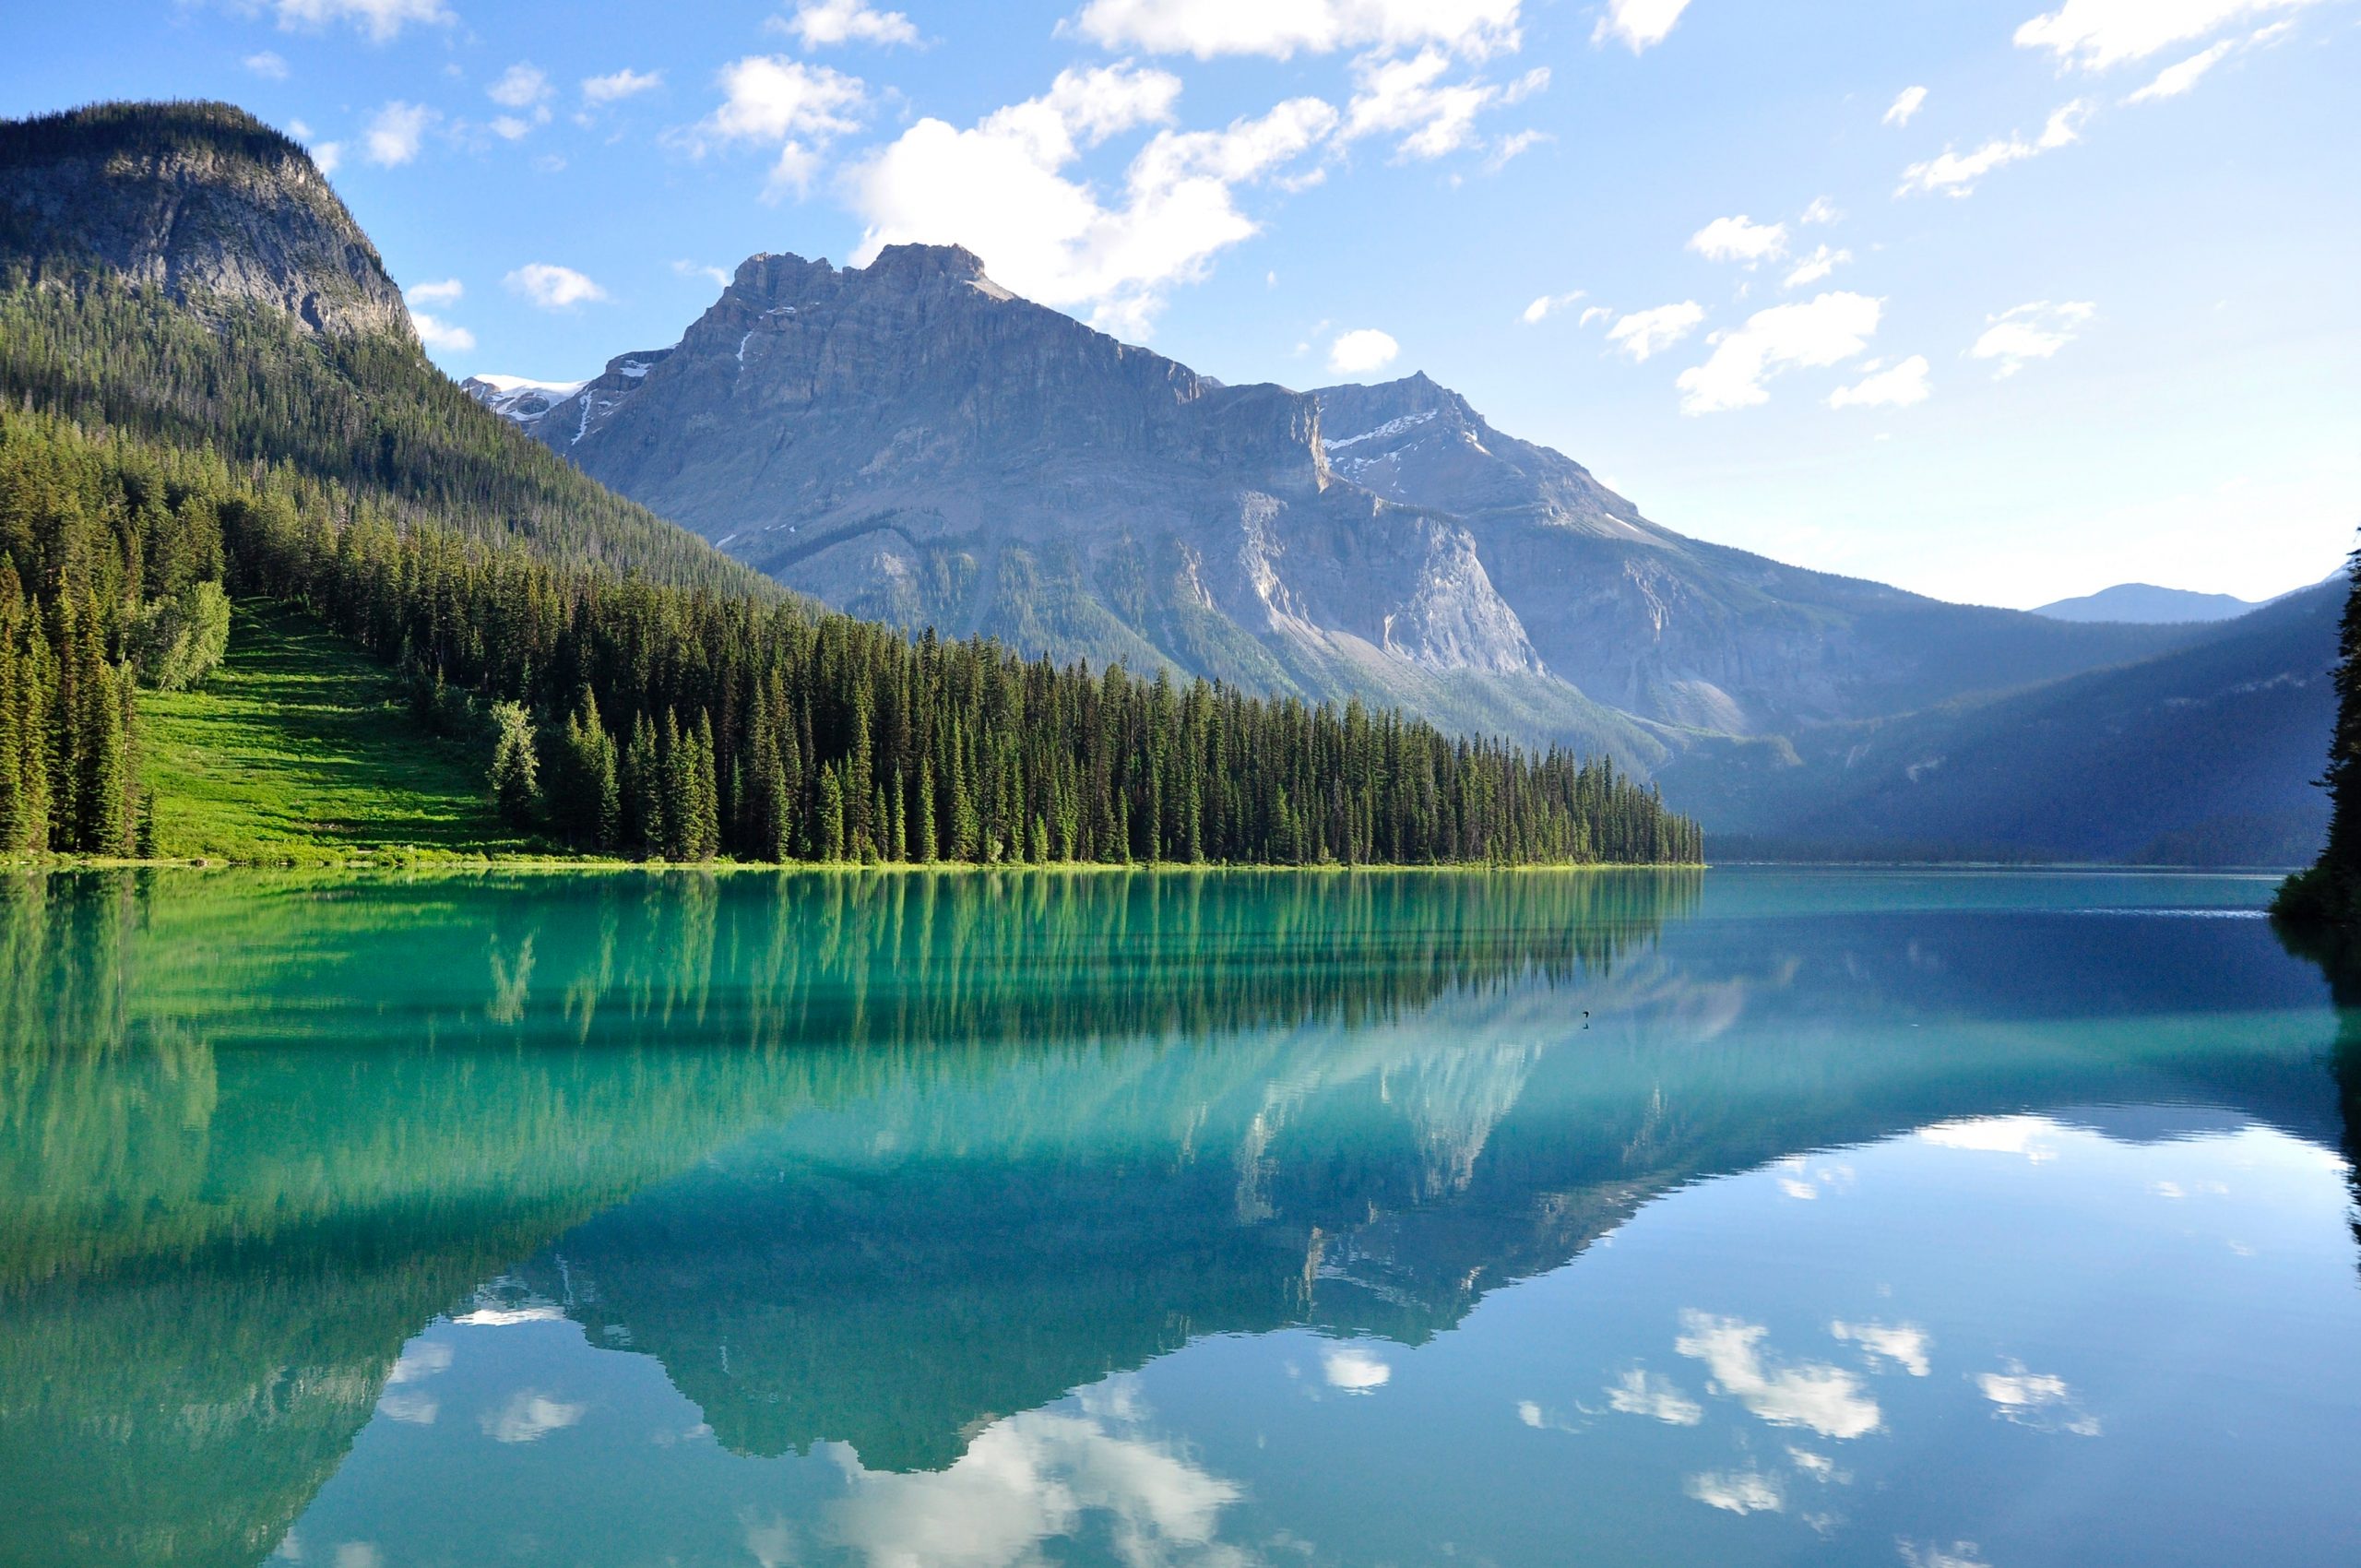 A photograph of a serene, still lake in front of a jagged rocky mountain. On the left, the rocky cliff face is covered by a dense, green pine forest. The water in the lake is so still it clearly reflects the jagged mountain, the blue sky, and the wisps of white clouds in the sky.